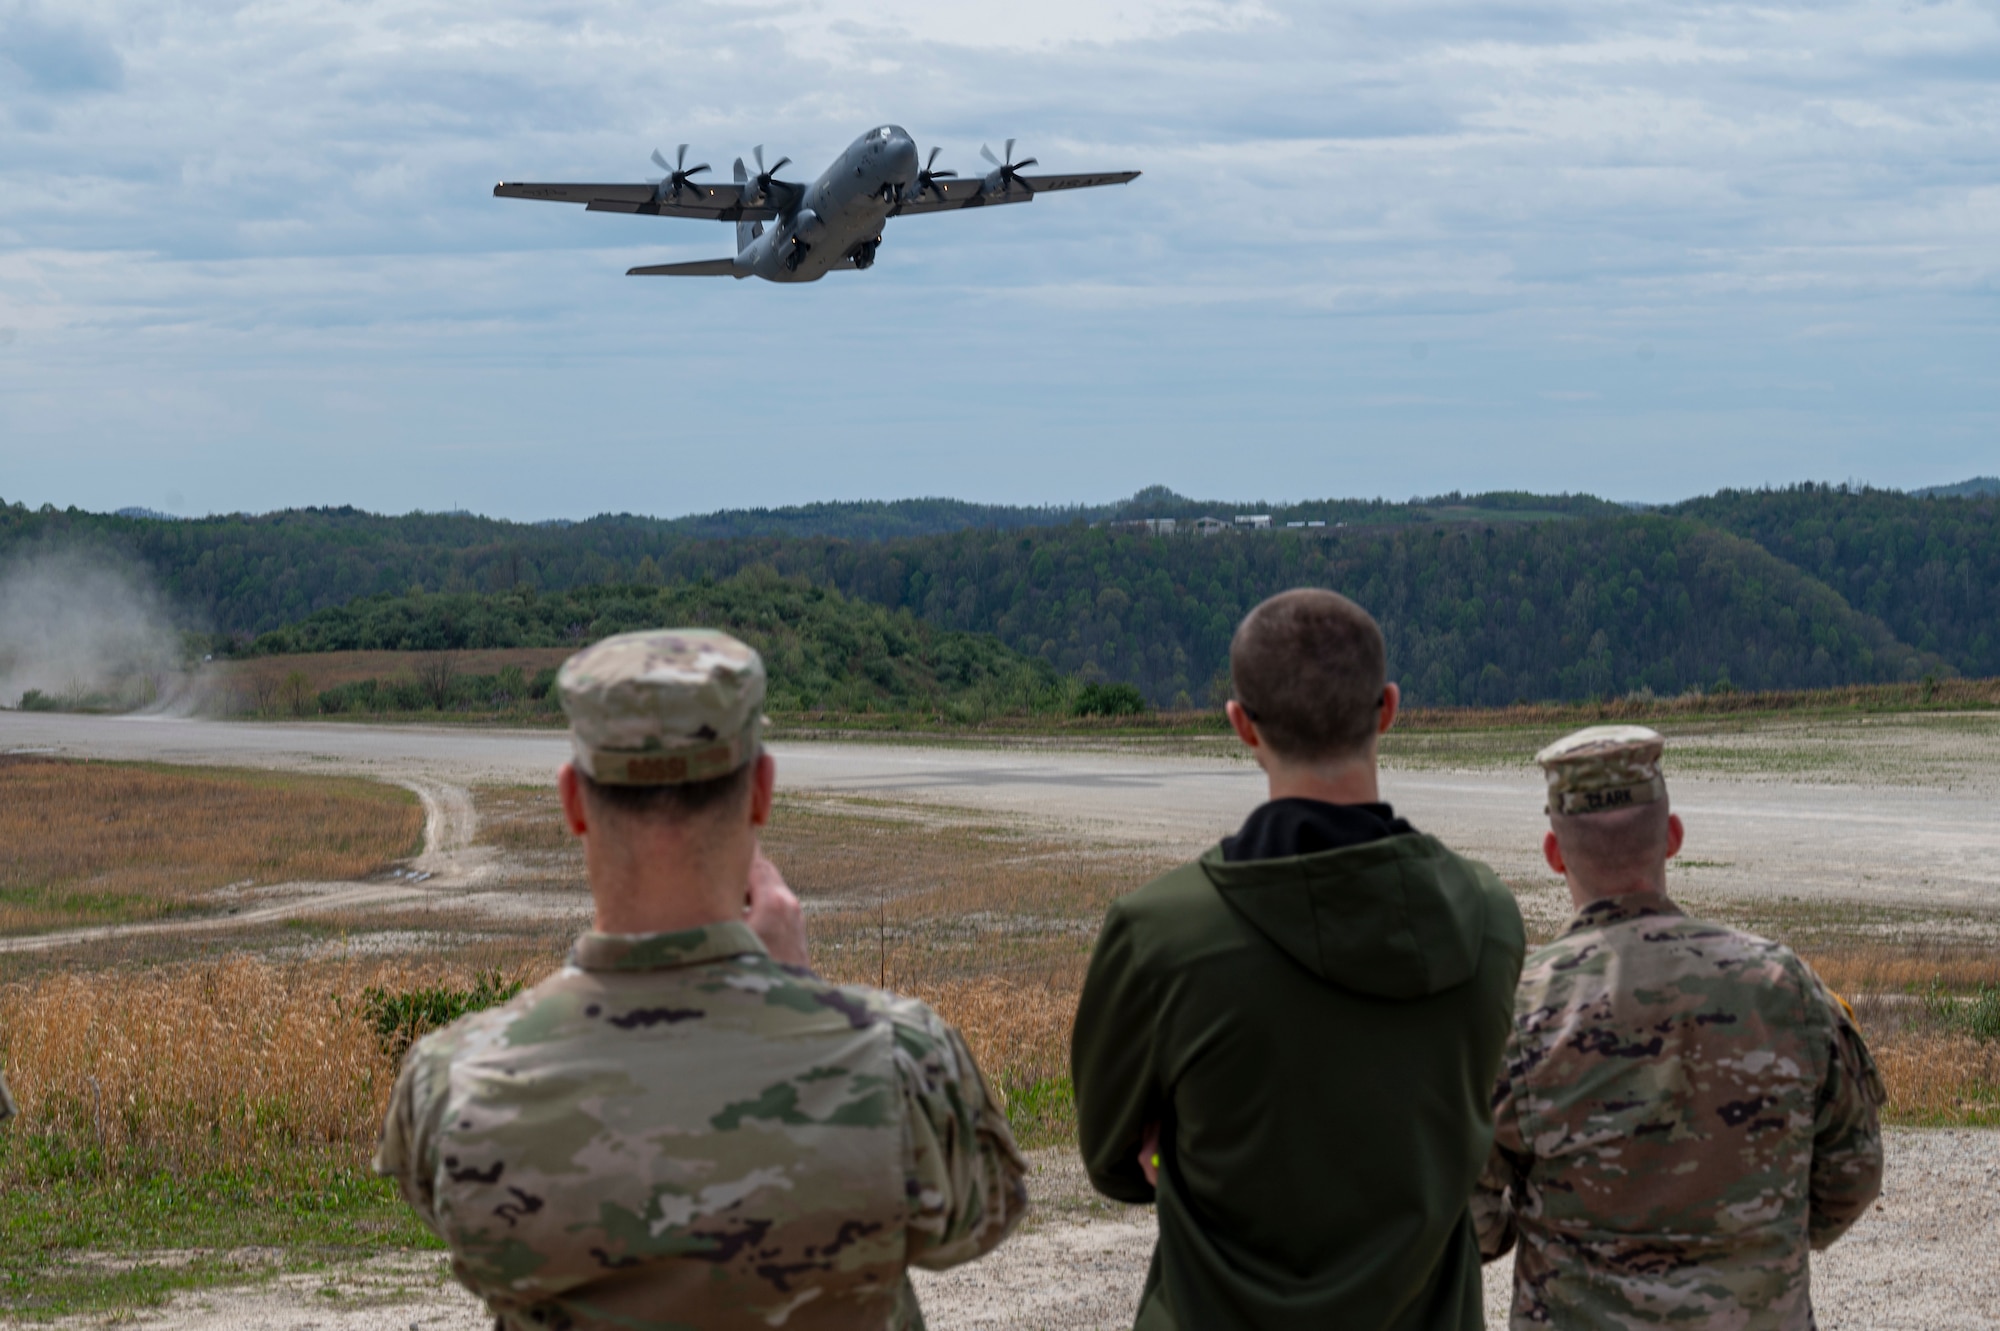 A U.S. Air Force C130J-30 takes off from an unpaved runway as Distinguished Visitors (DV) look on during Sentry Storm 24 DV Day, April 17, 2024, at Camp Branch, Logan County, W.Va. Sentry Storm is an exercise staged at McLaughlin ANGB in Charleston, Camp Branch in Logan County, Shepherd Field in Martinsburg and in the skies over West Virginia, involving an estimated 500 personnel from the state’s Air and Army National Guard, partnering National Guard units form Kentucky, North Carolina, and Michigan, as well as Civil Air Patrol units. (U.S. Air National Guard photo by 2nd Lt. De-Juan Haley)